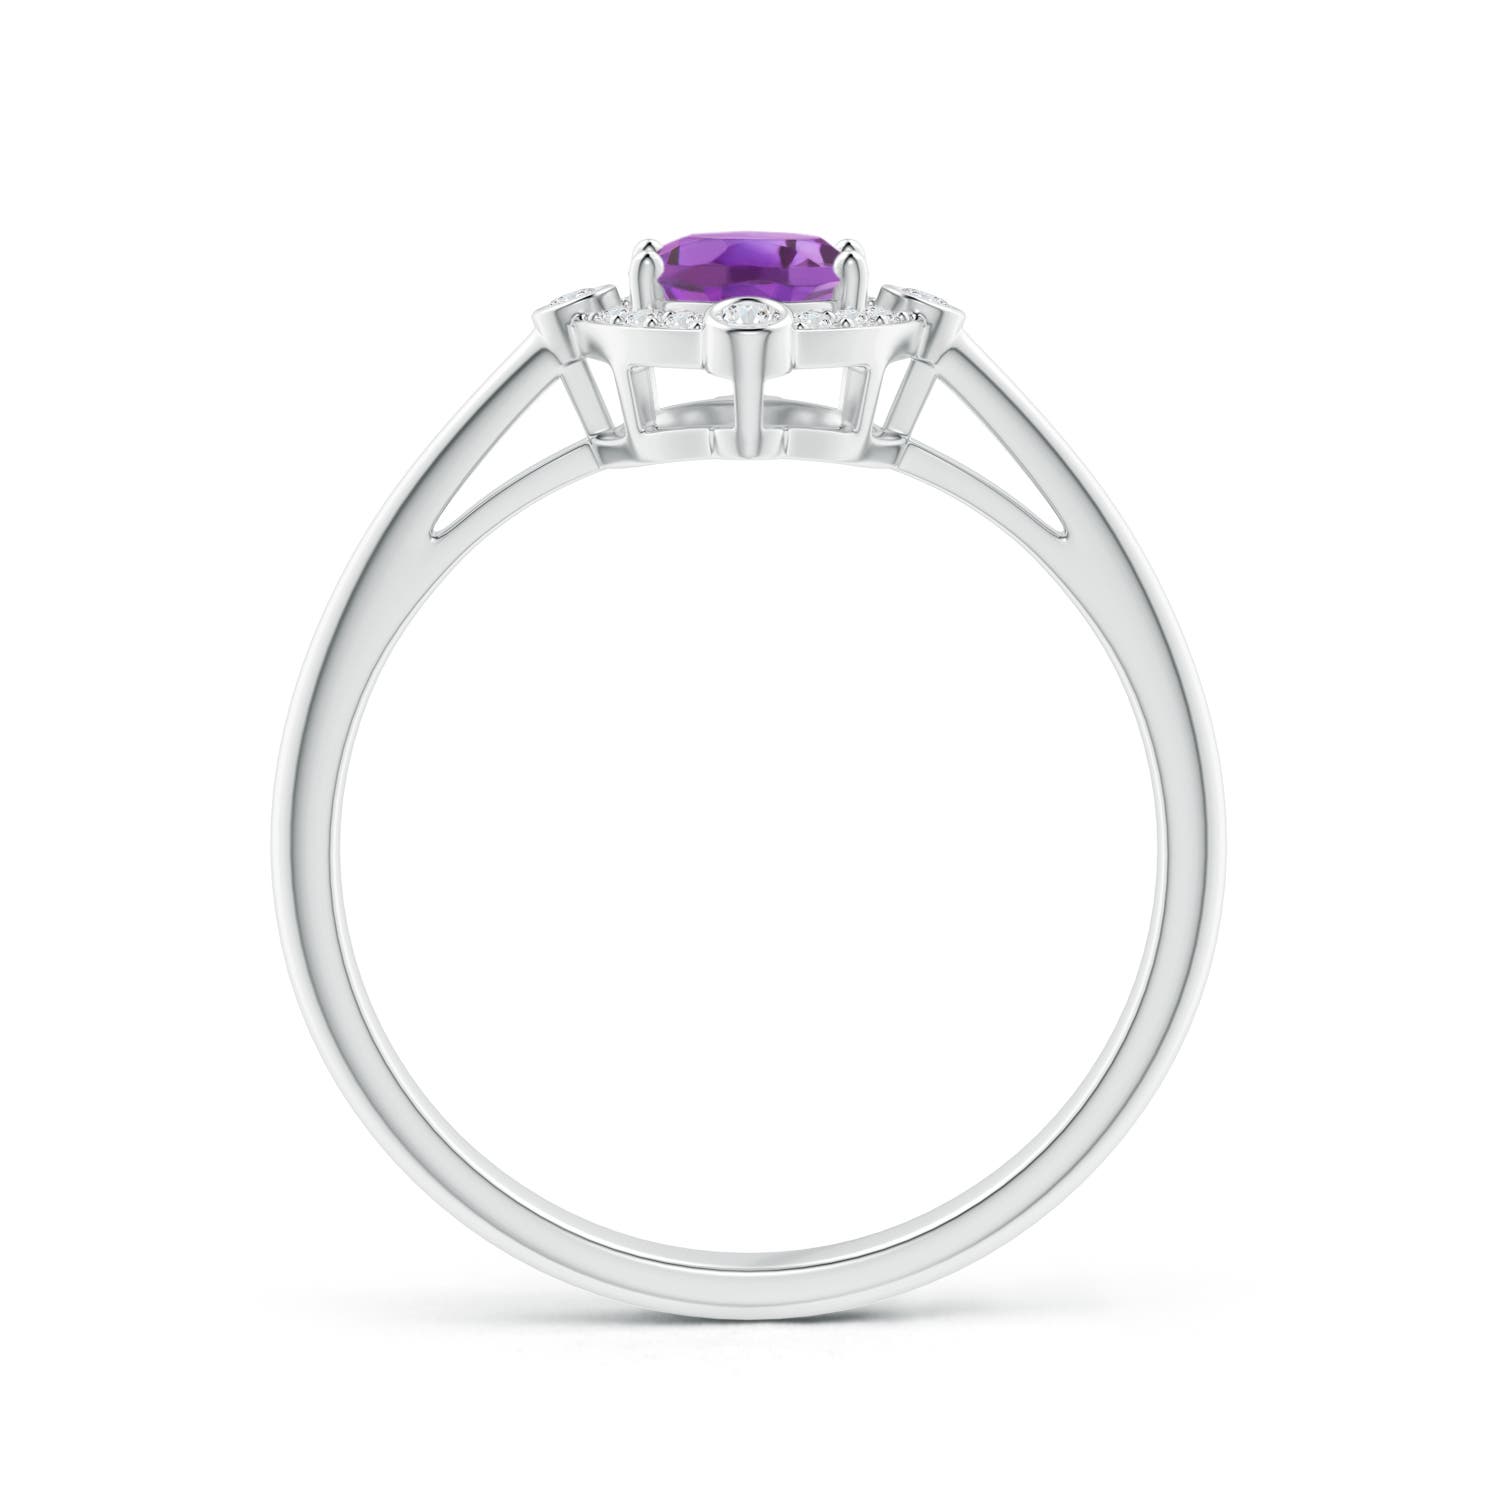 A - Amethyst / 0.82 CT / 14 KT White Gold